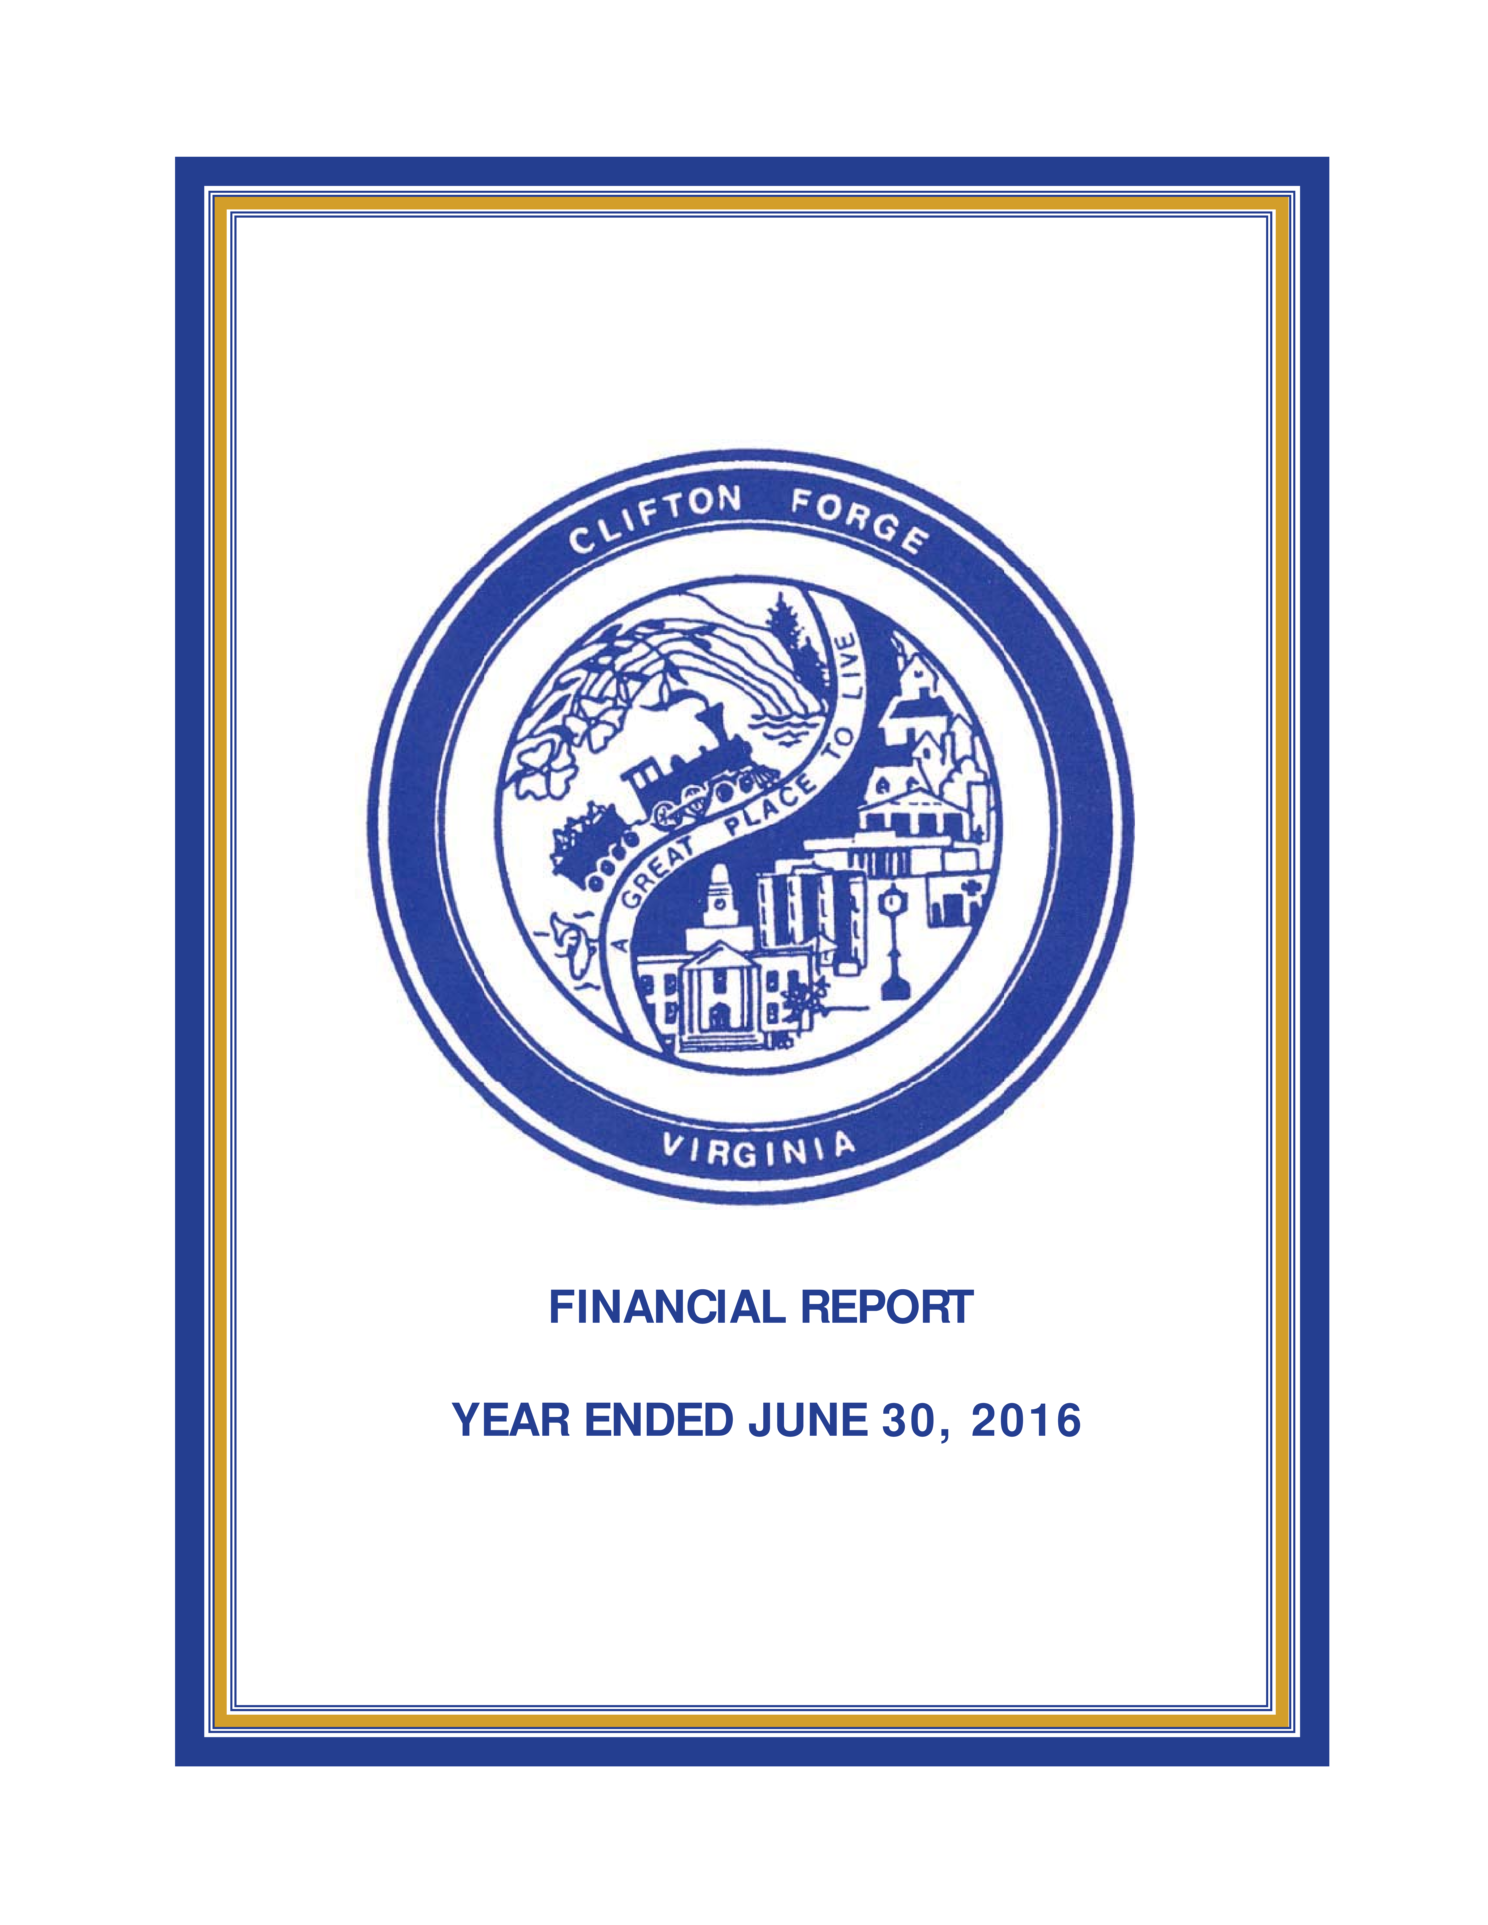 2016 Annual Financial Report for Town of Clifton Forge